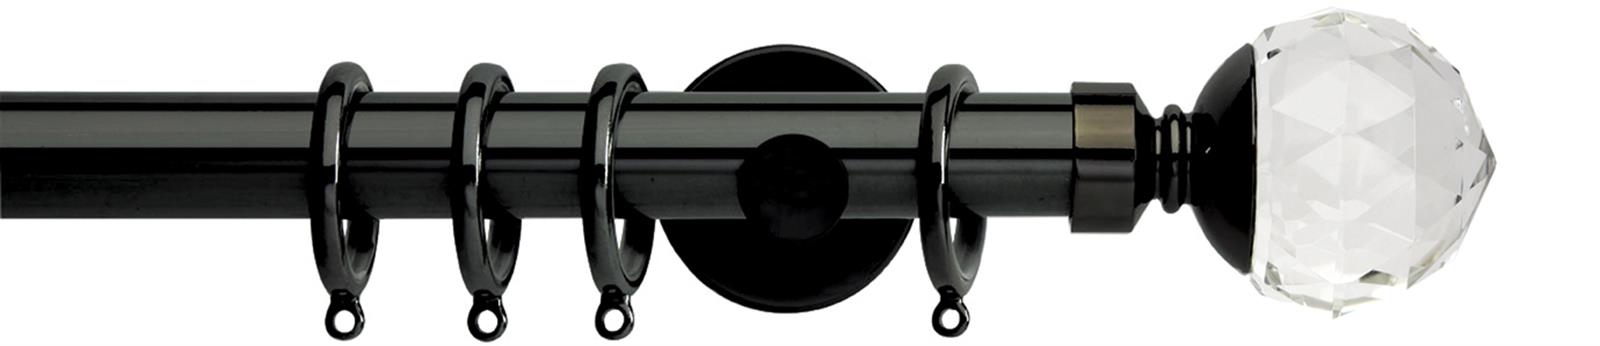 Neo Premium 28mm Pole Black Nickel Cylinder Clear Faceted Ball